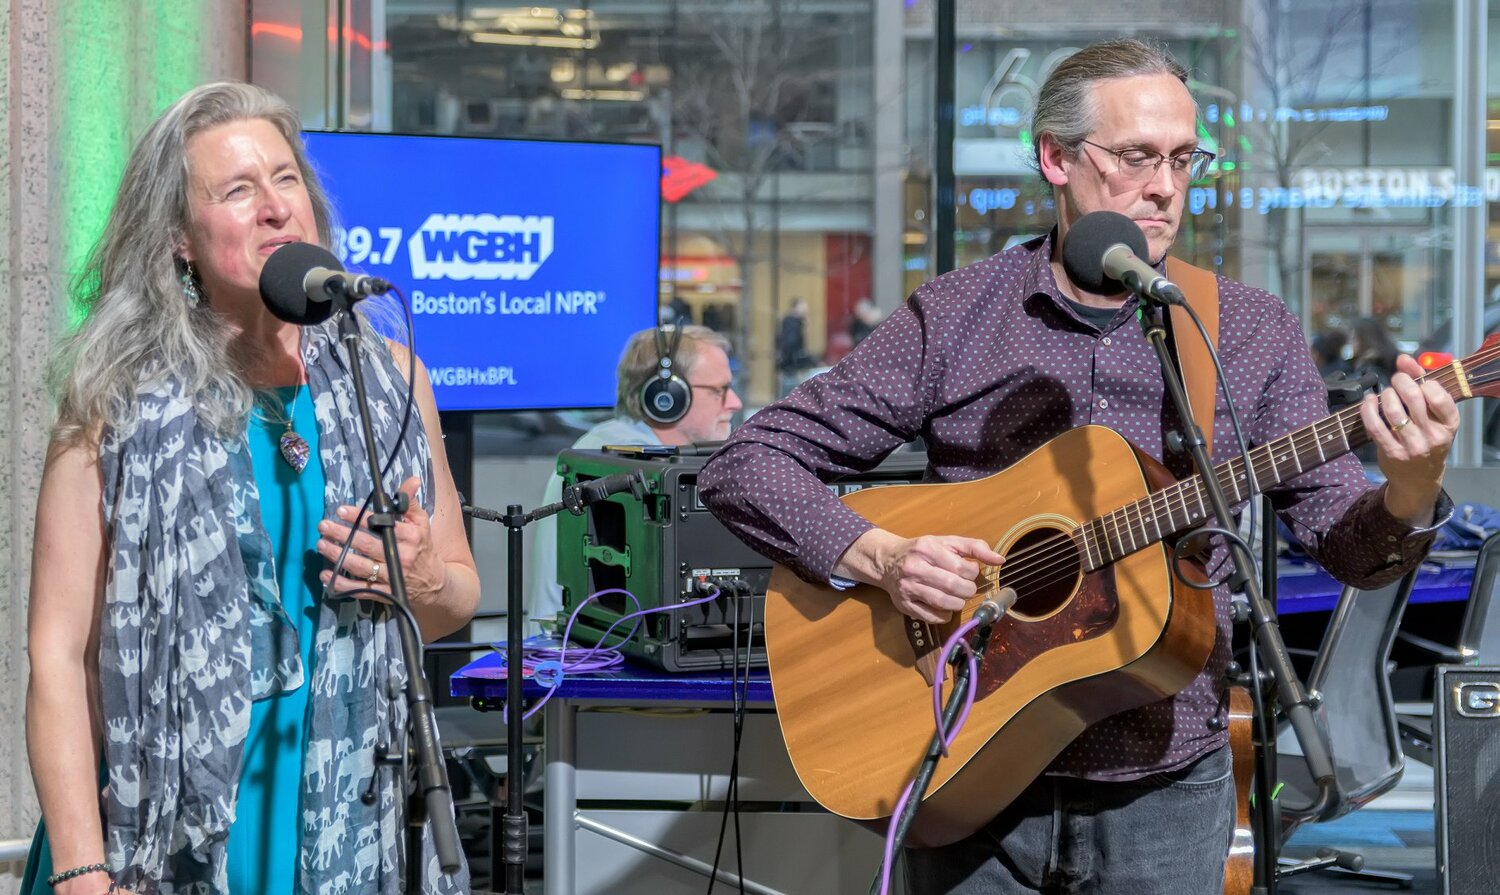 Diane and Chris Myers met while both were students at the University of Massachusetts-Lowell. Aside from a few years of downtime while their children were young, they’ve been making music together for most of 30 years.